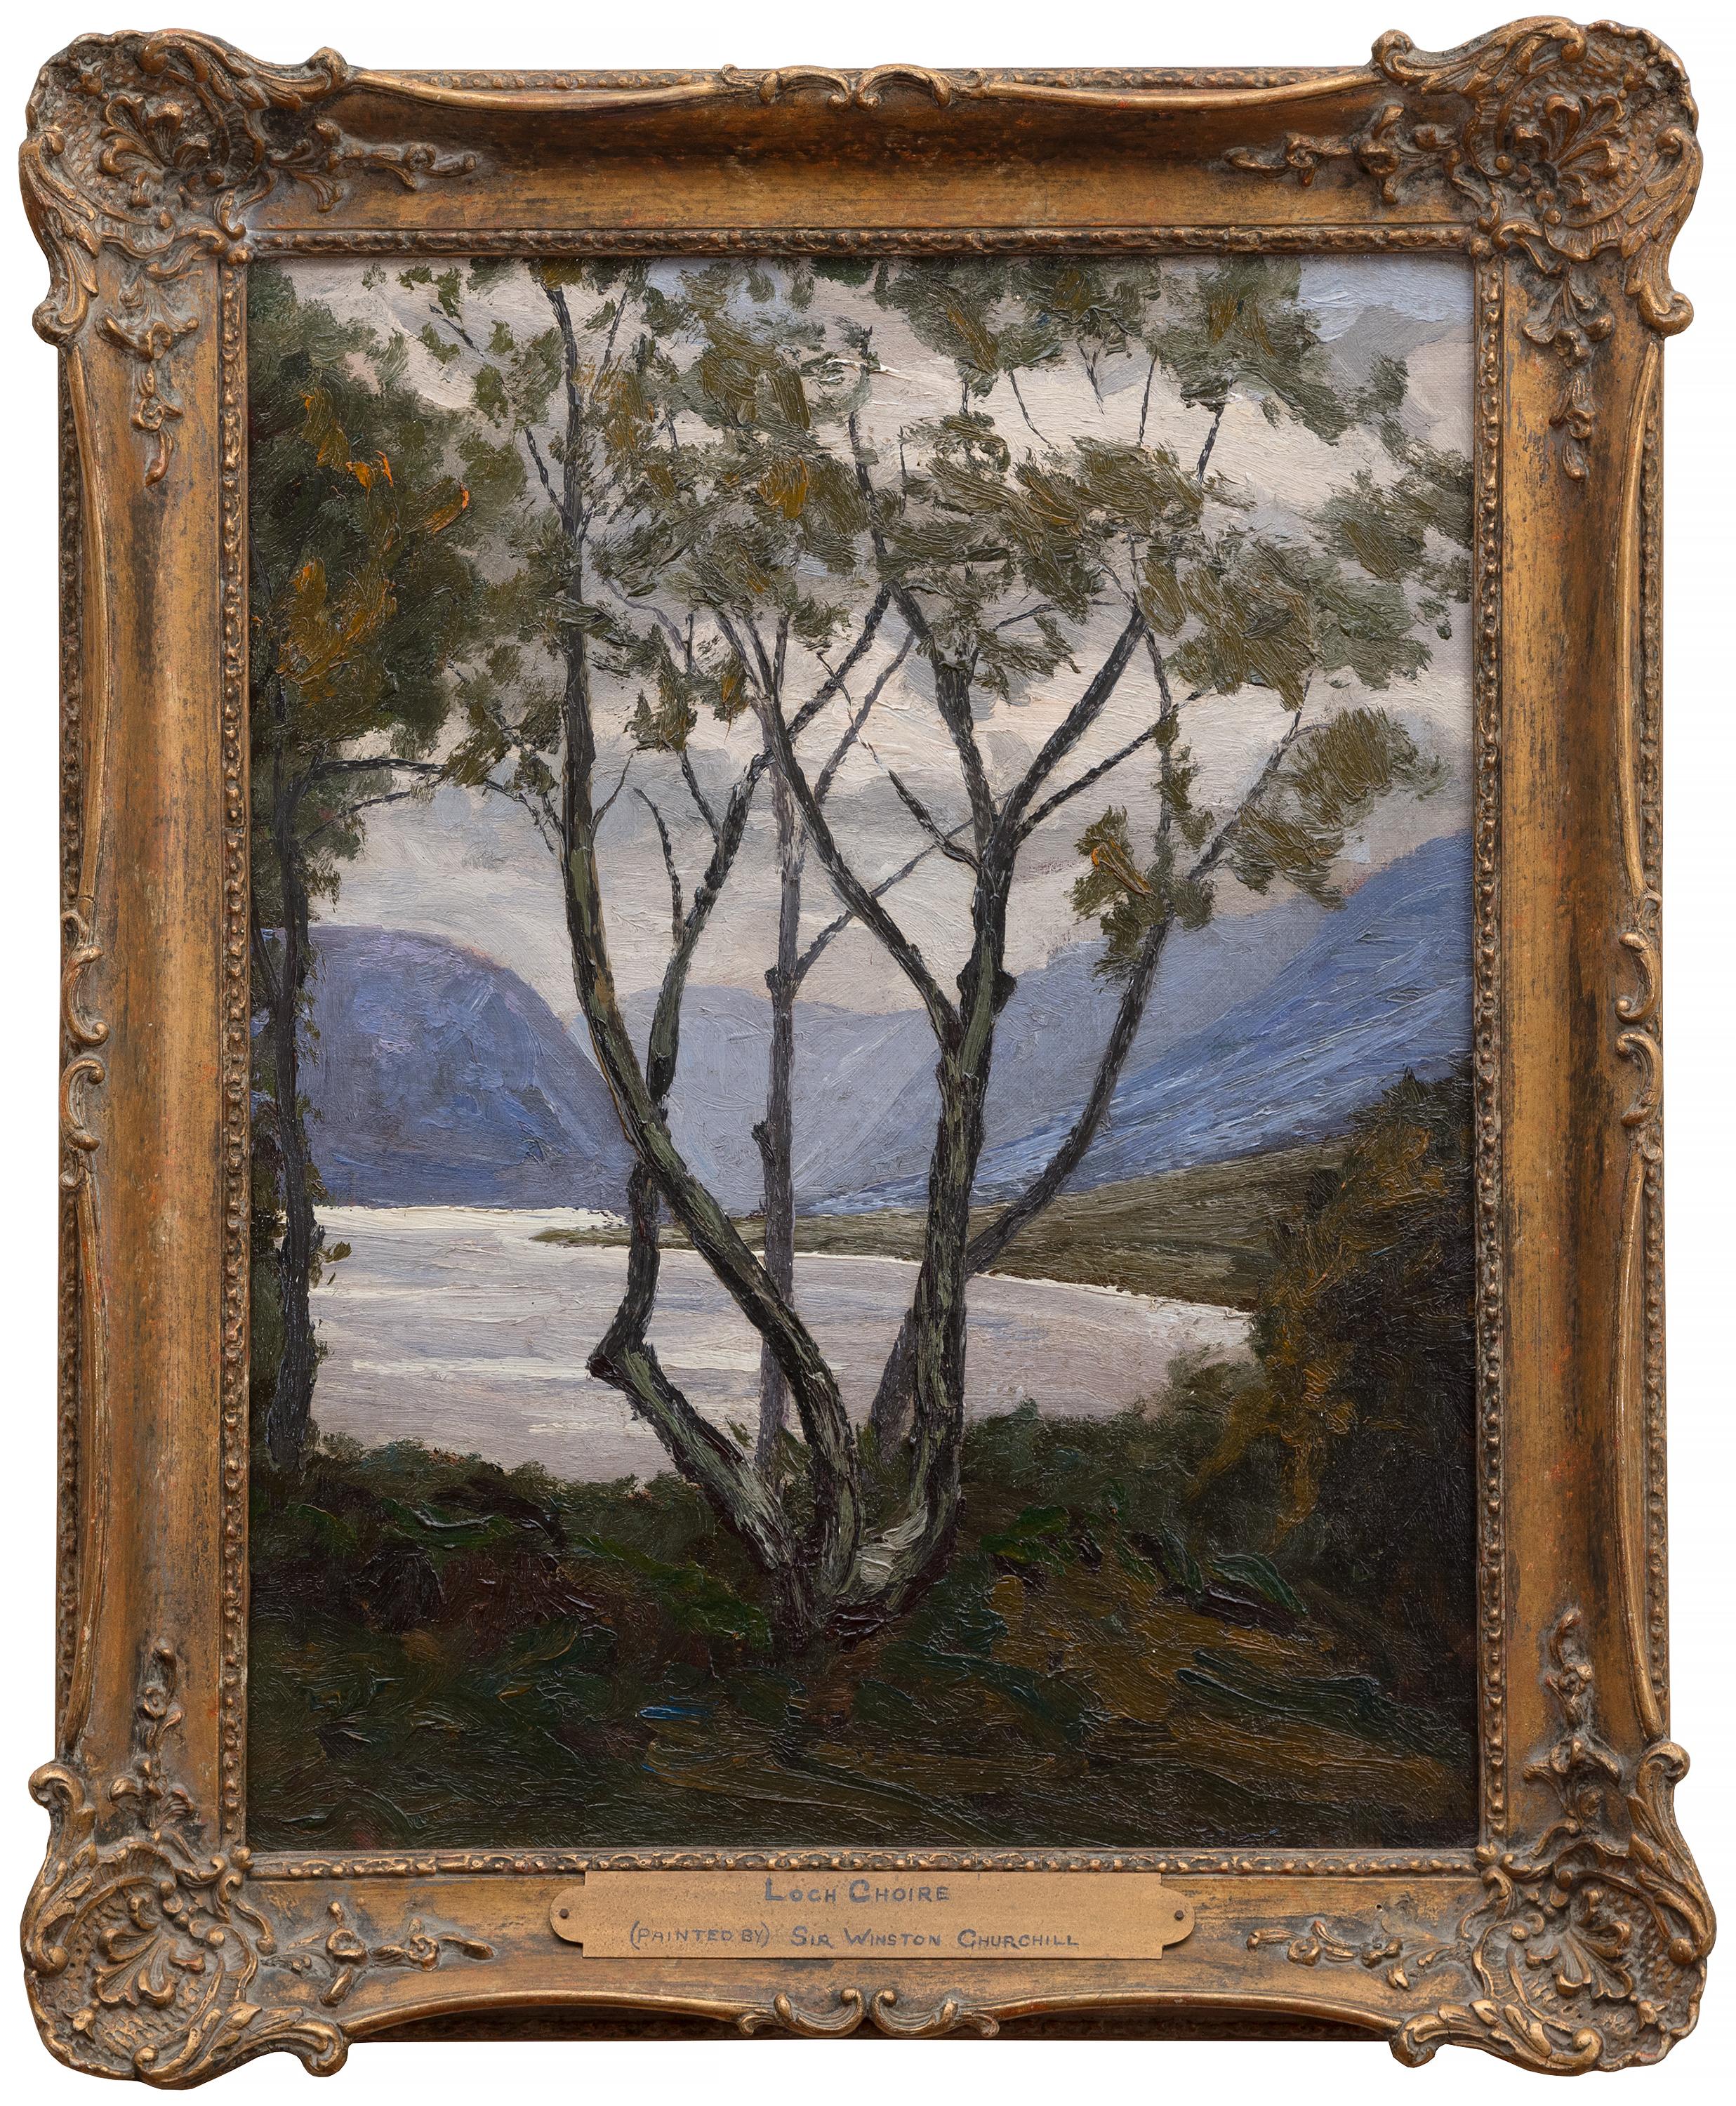 View of Loch Choire - Painting by Winston Churchill